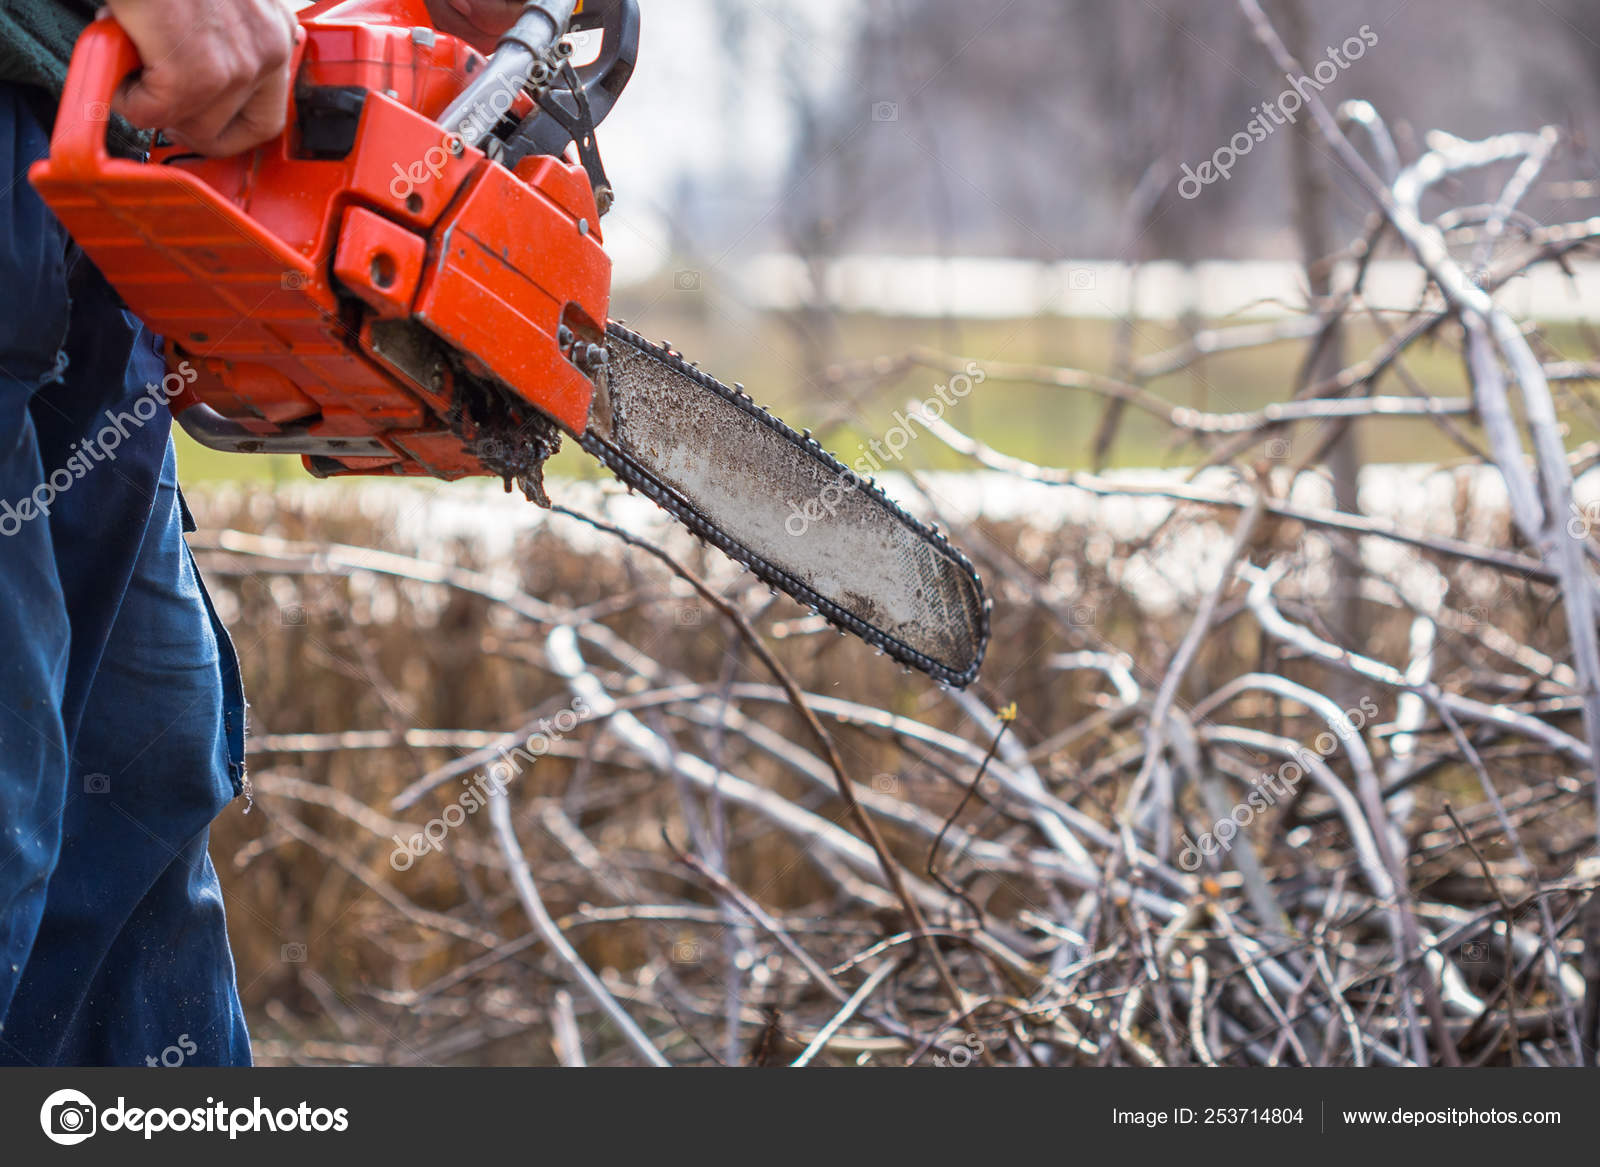 Old Man In Blue Pants Hold Orange Chainsaw With His Bare Hands